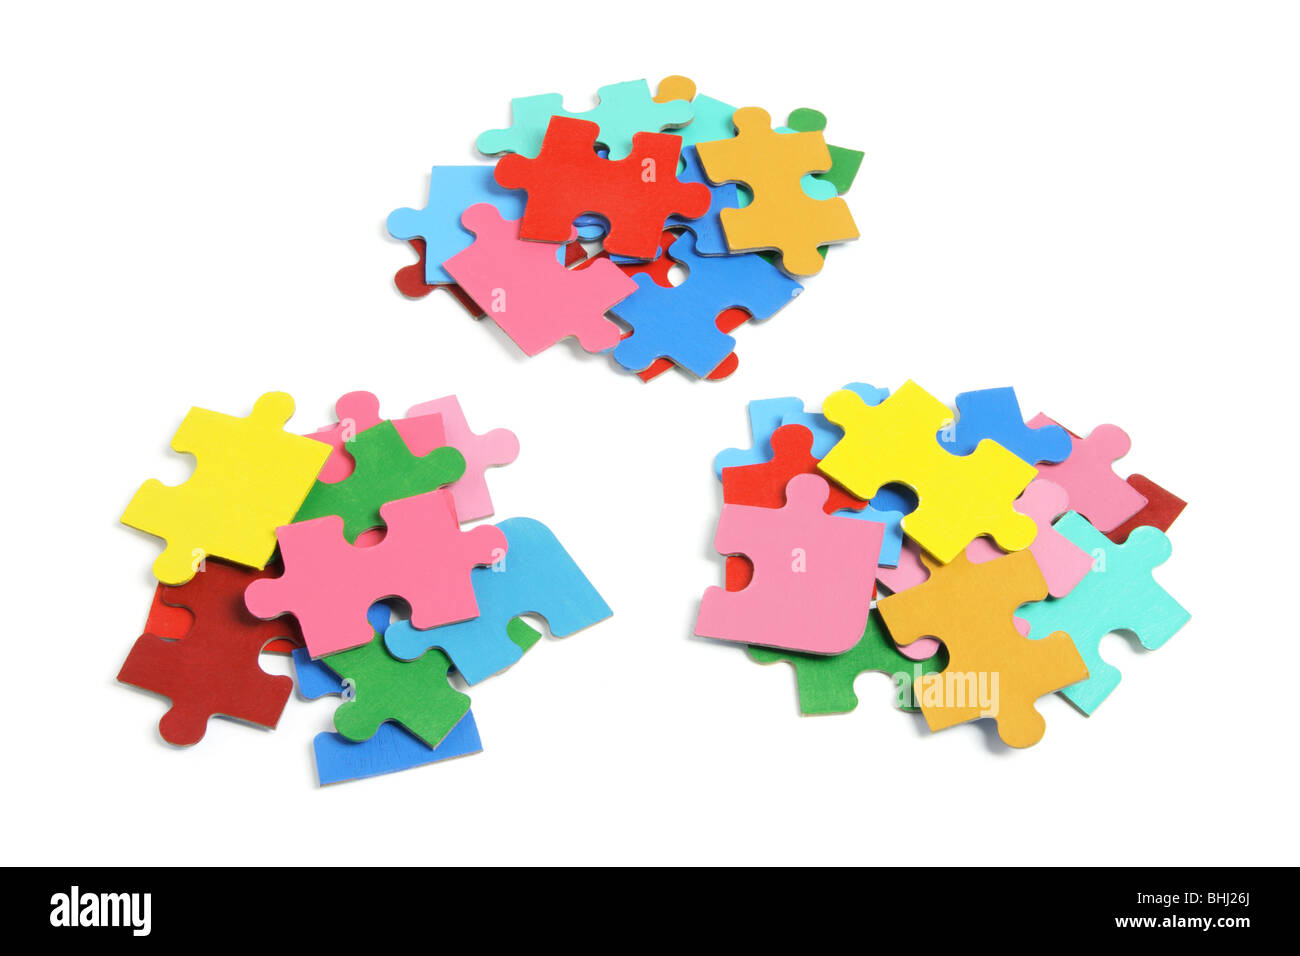 Piles of Jigsaw Puzzle Pieces Stock Photo